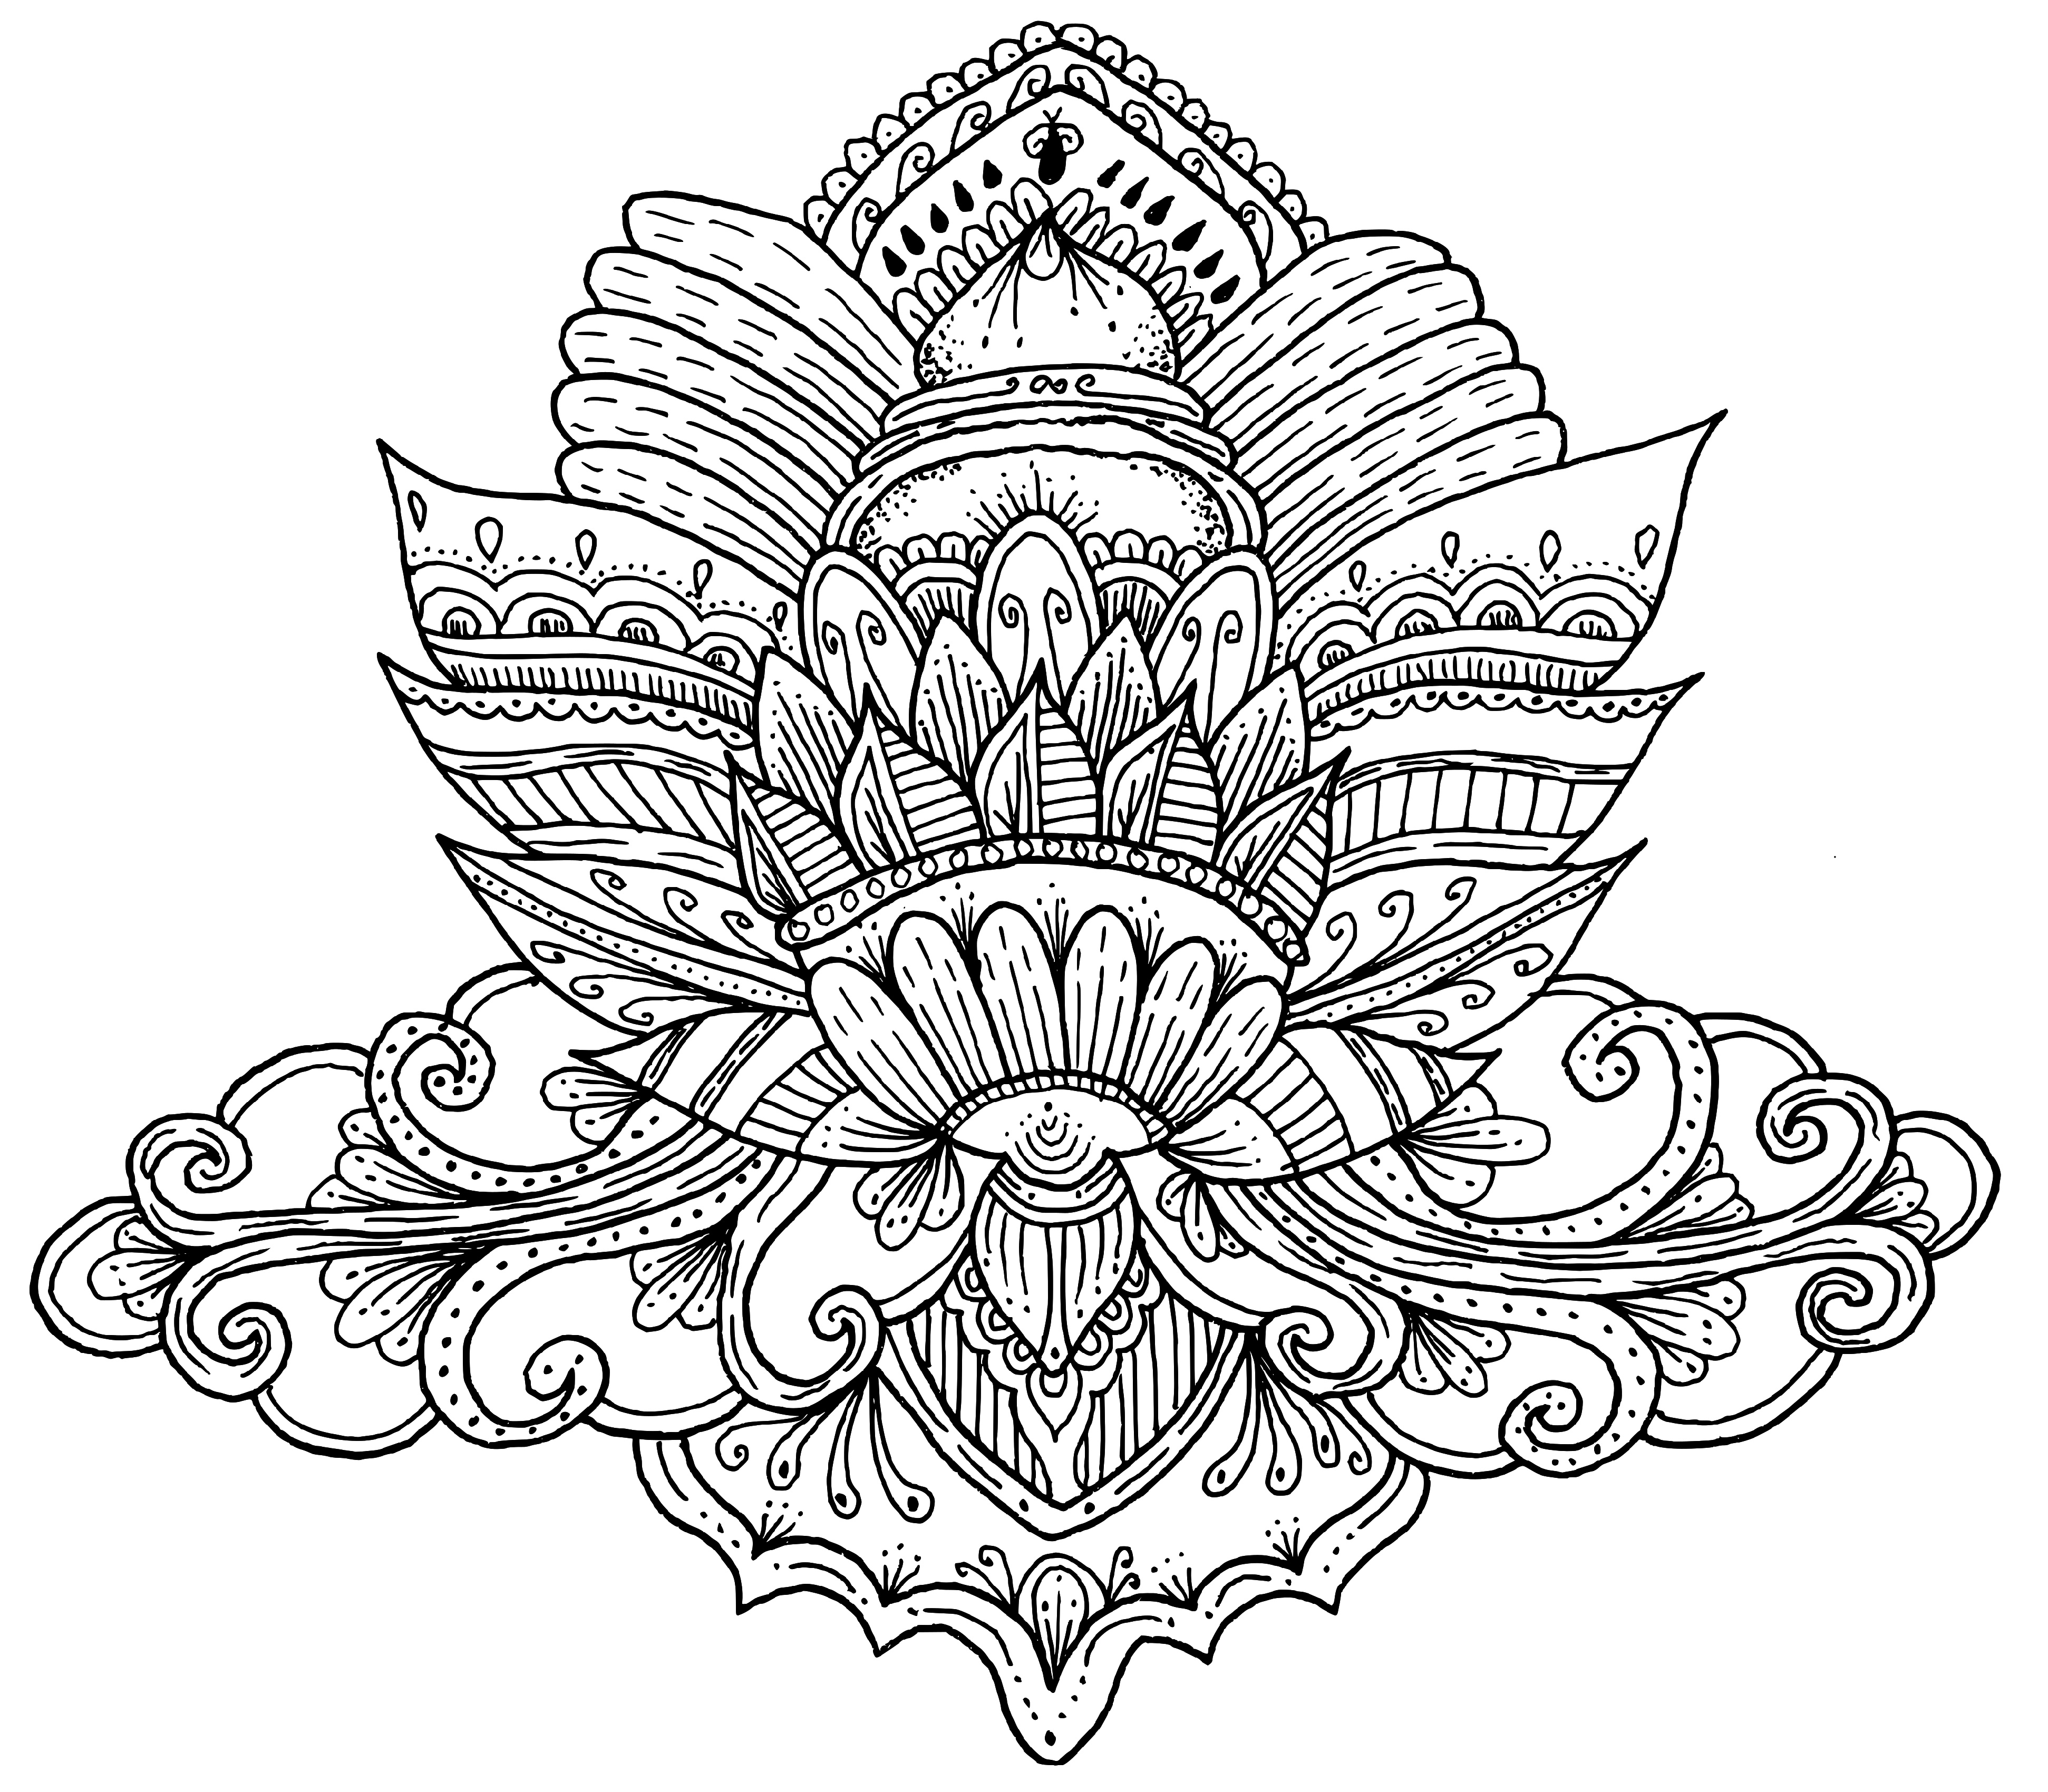 Lotus Flower Coloring Page For Adults